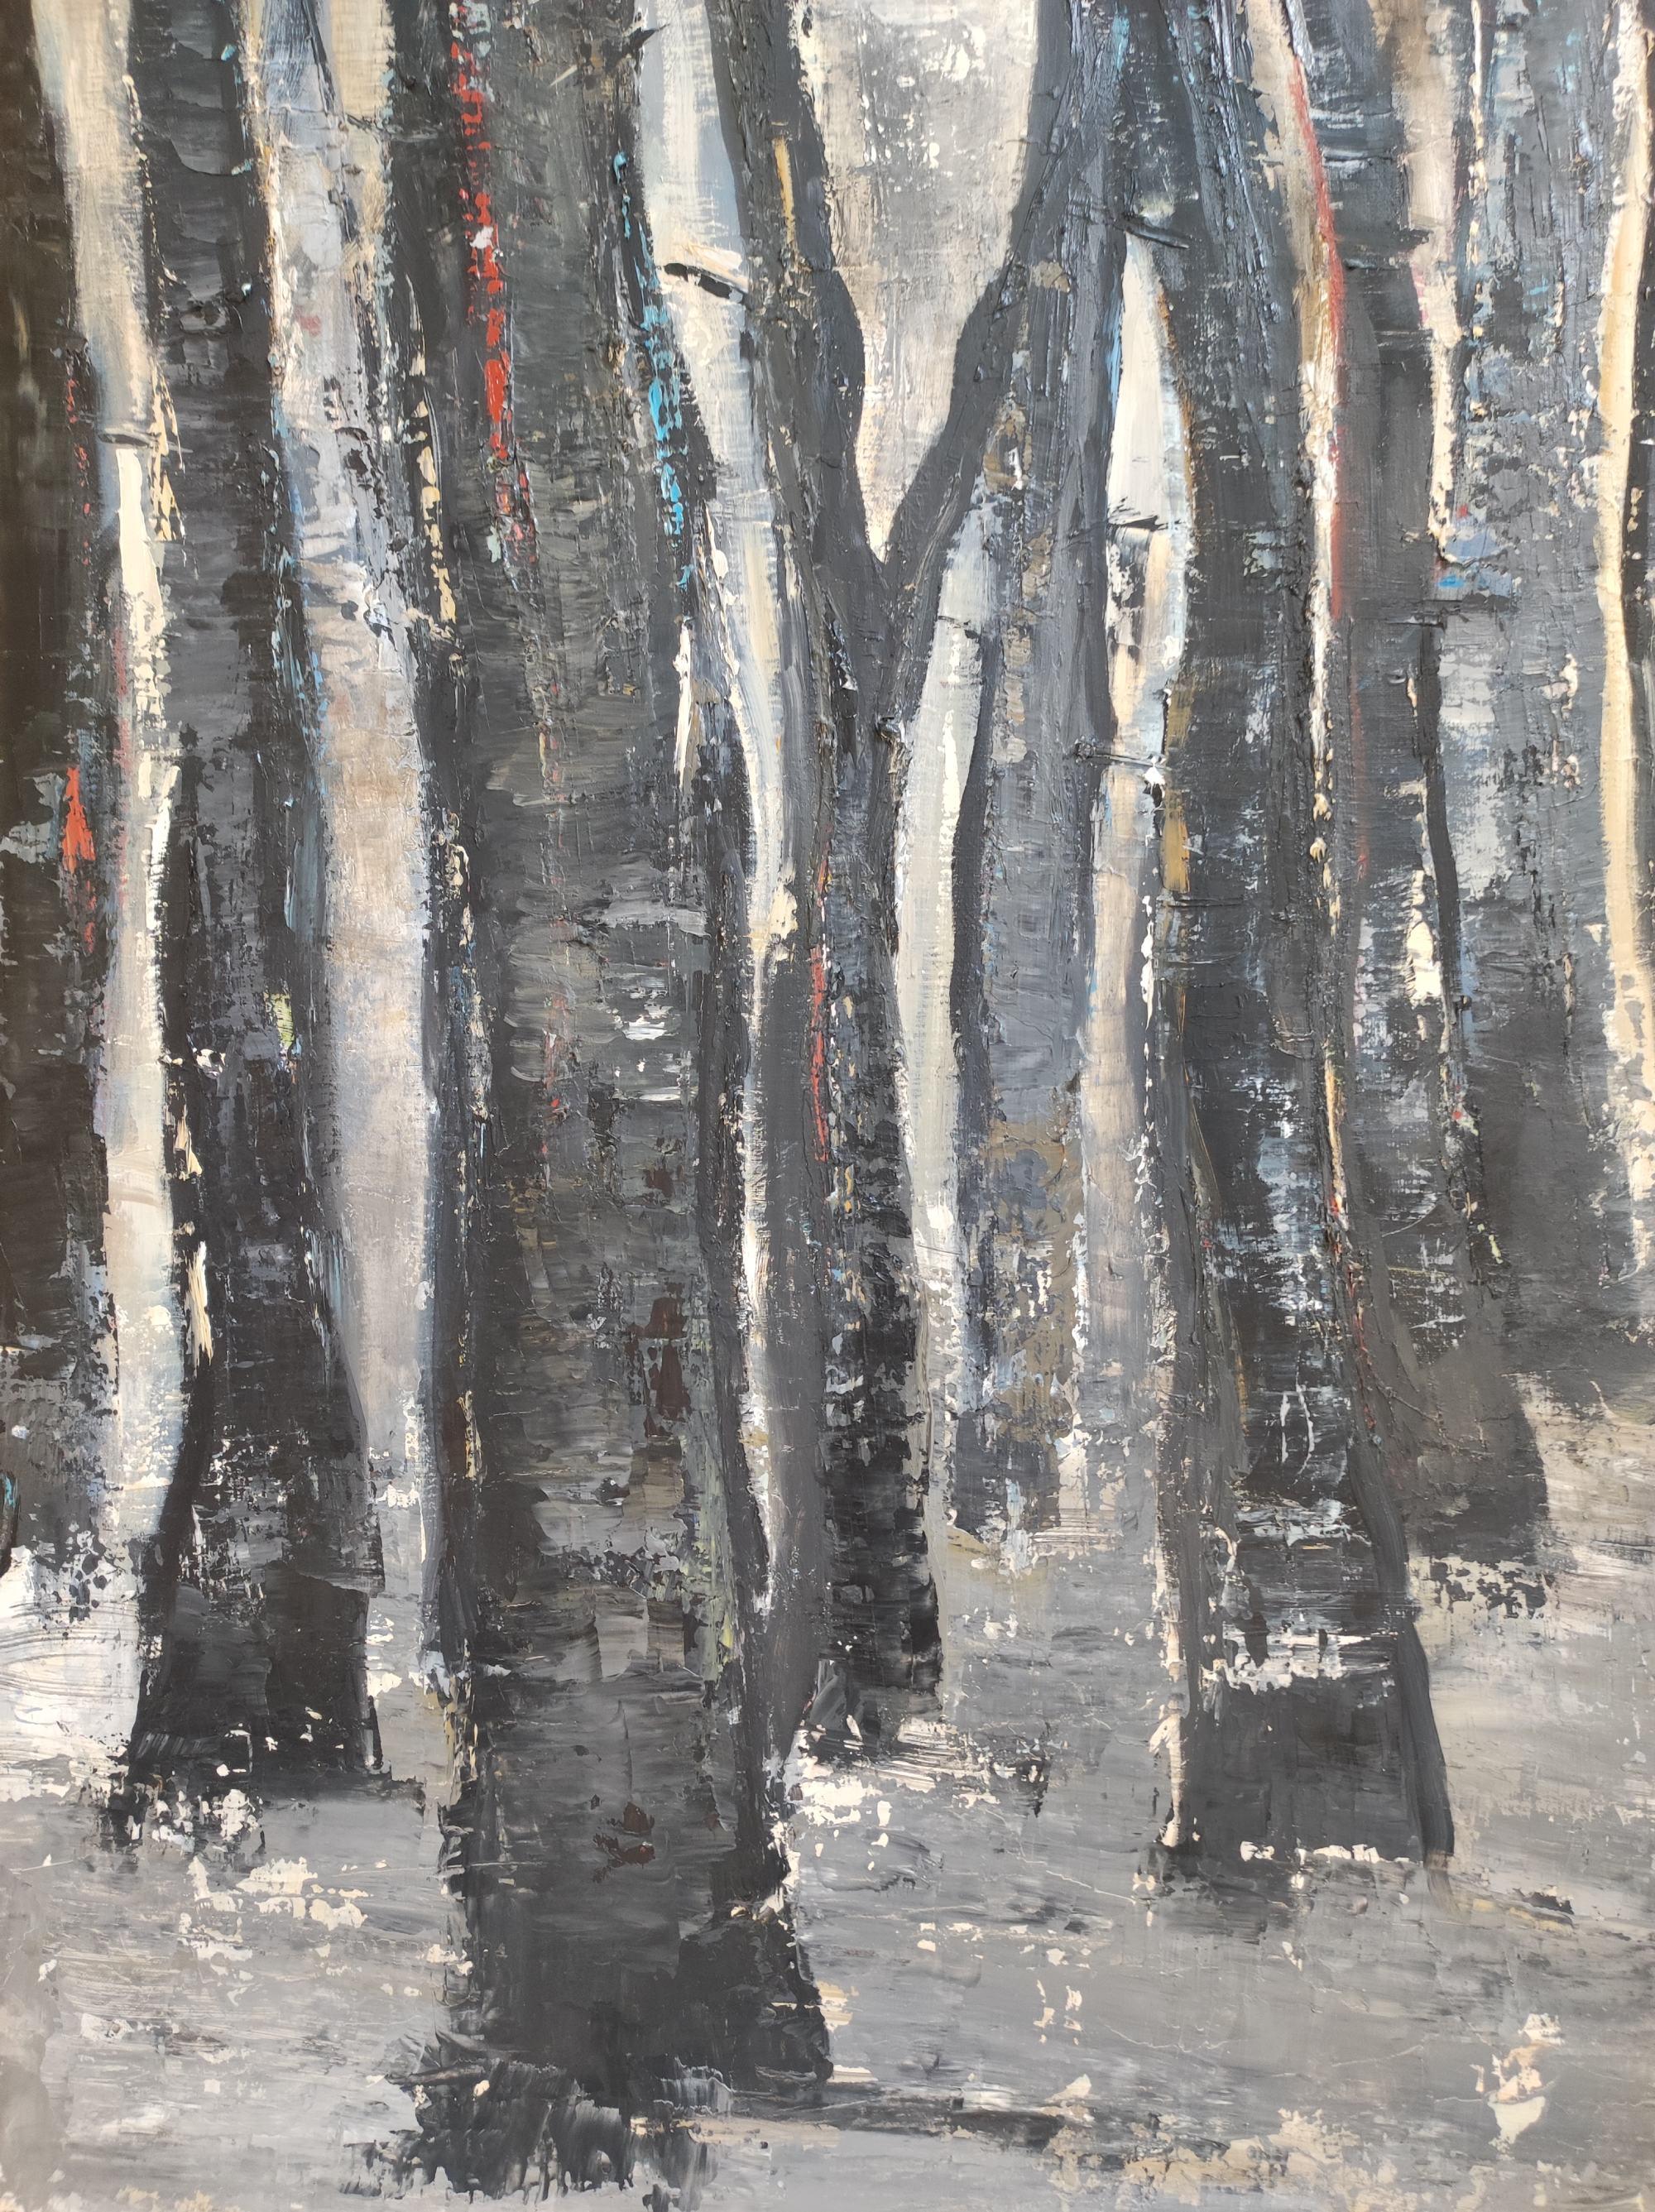 winter forest, black trees, oil on canvas, expressionism abstract, french artist - Abstract Expressionist Painting by SOPHIE DUMONT